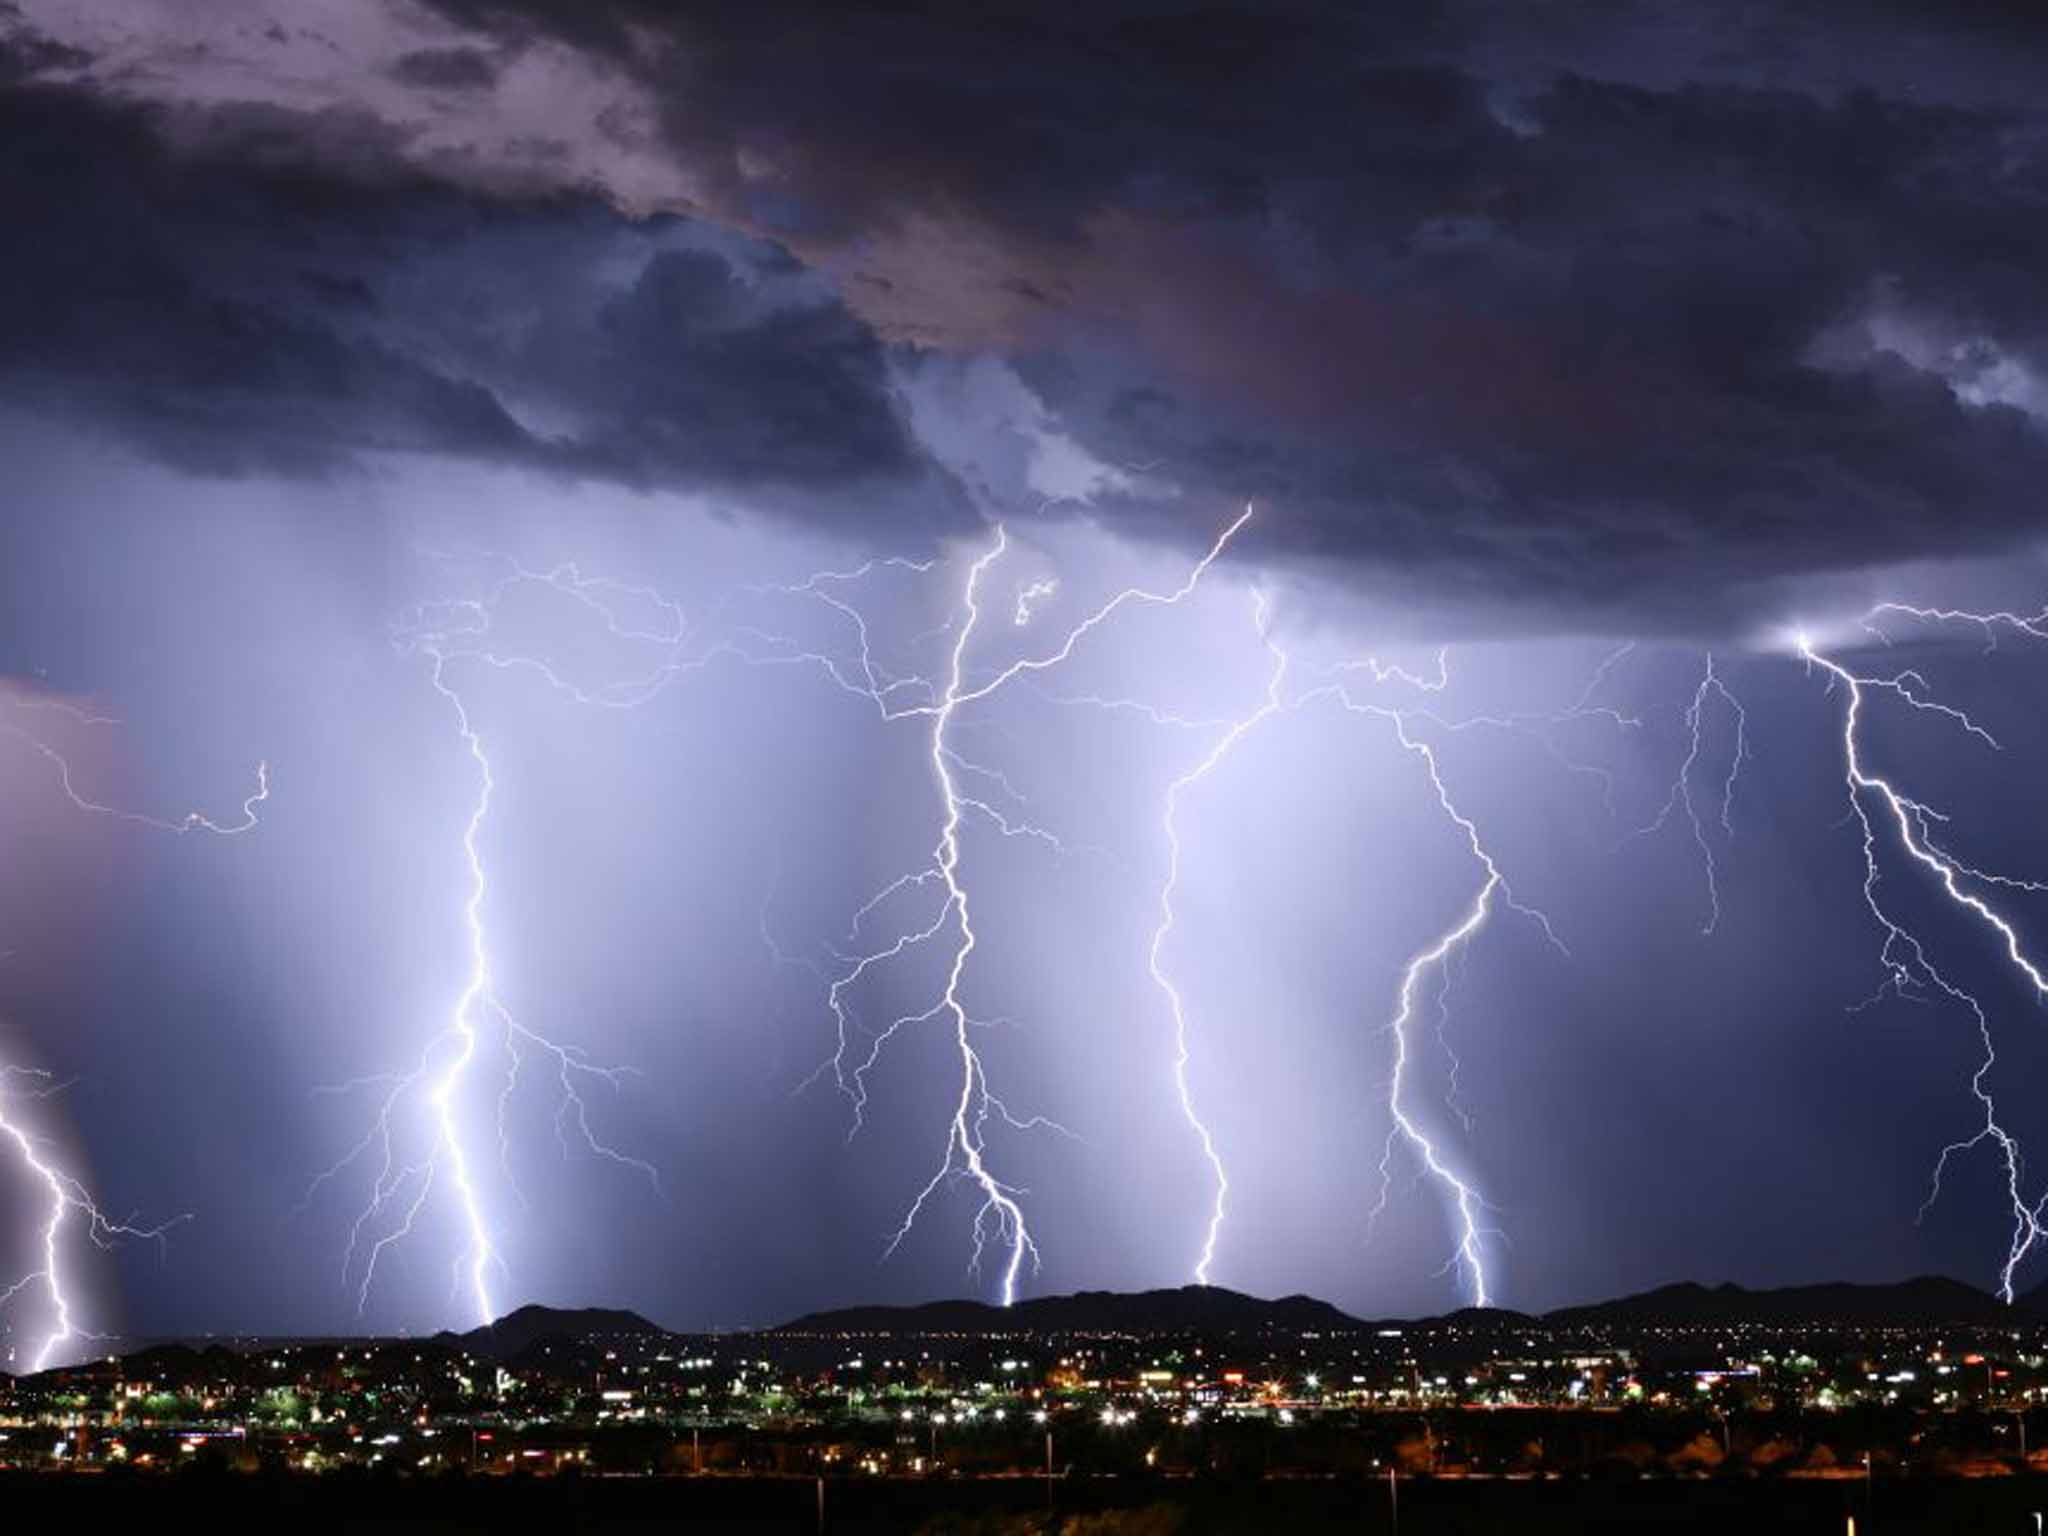 About 50 flashes of lightning are generated every second across the world